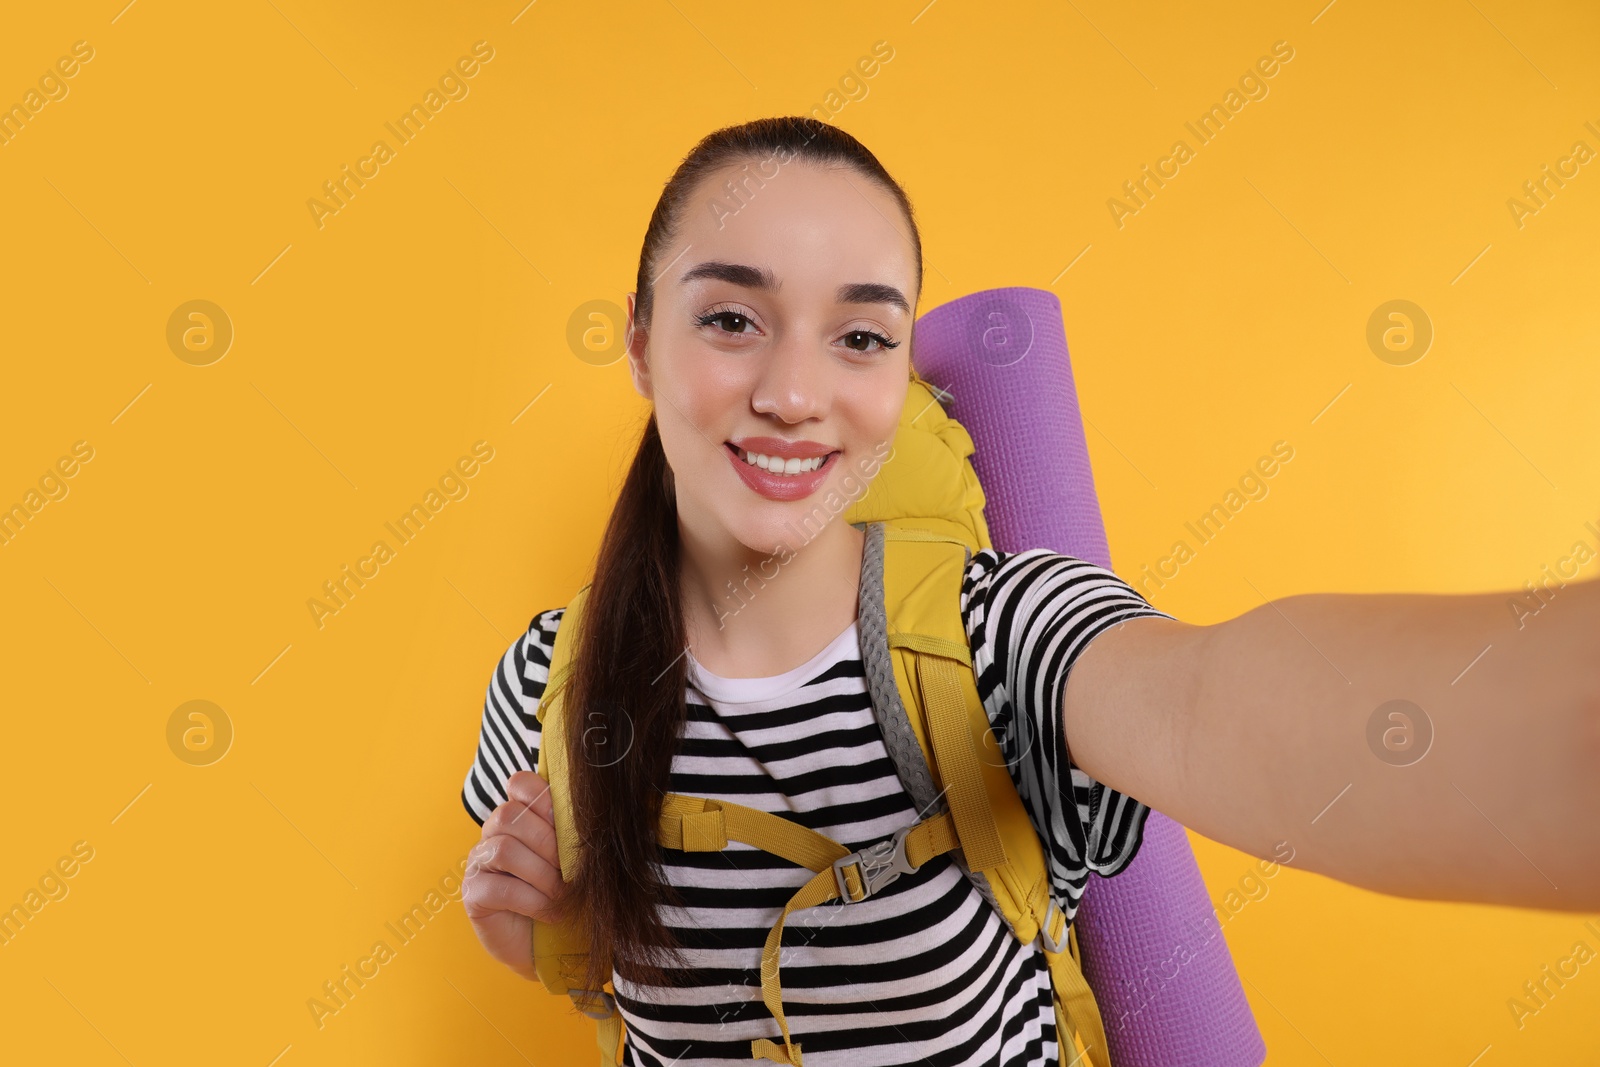 Photo of Smiling young woman with backpack taking selfie on orange background. Active tourism